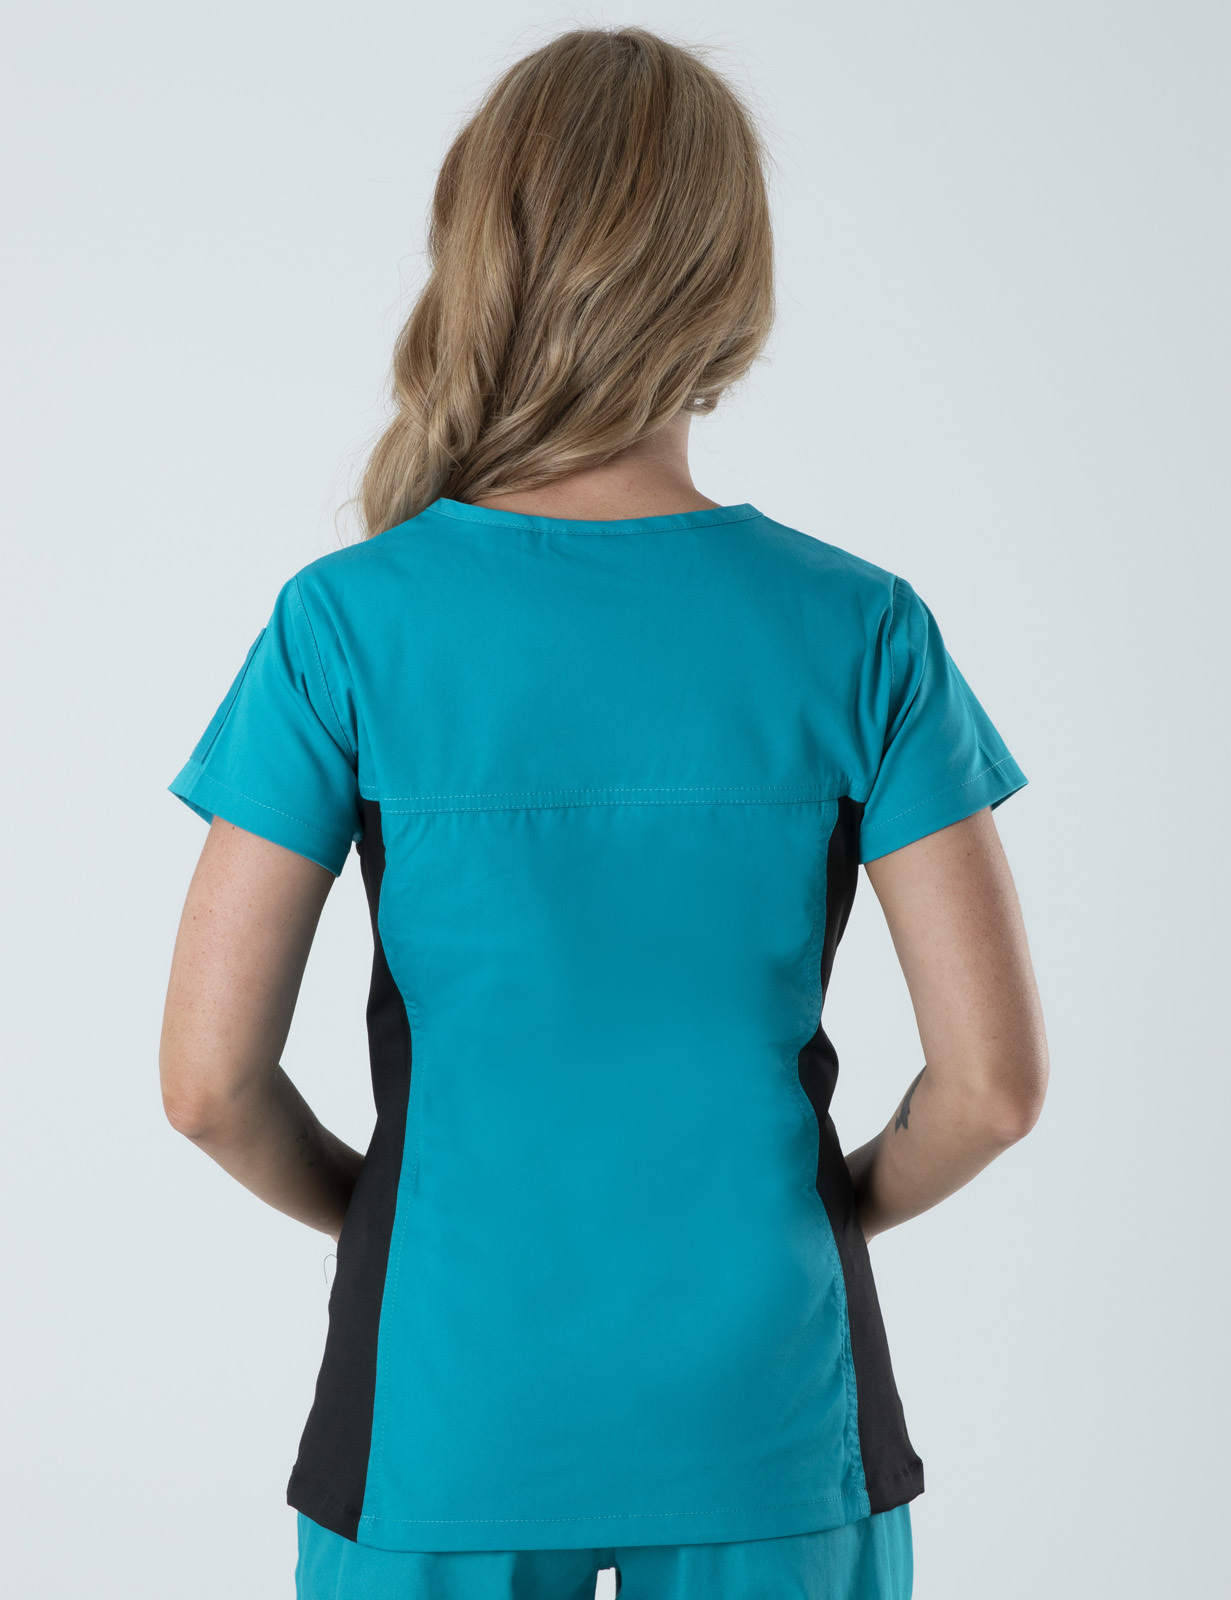 Women's Fit Solid Scrub Top With Spandex Panel - Teal - XX Small - 3